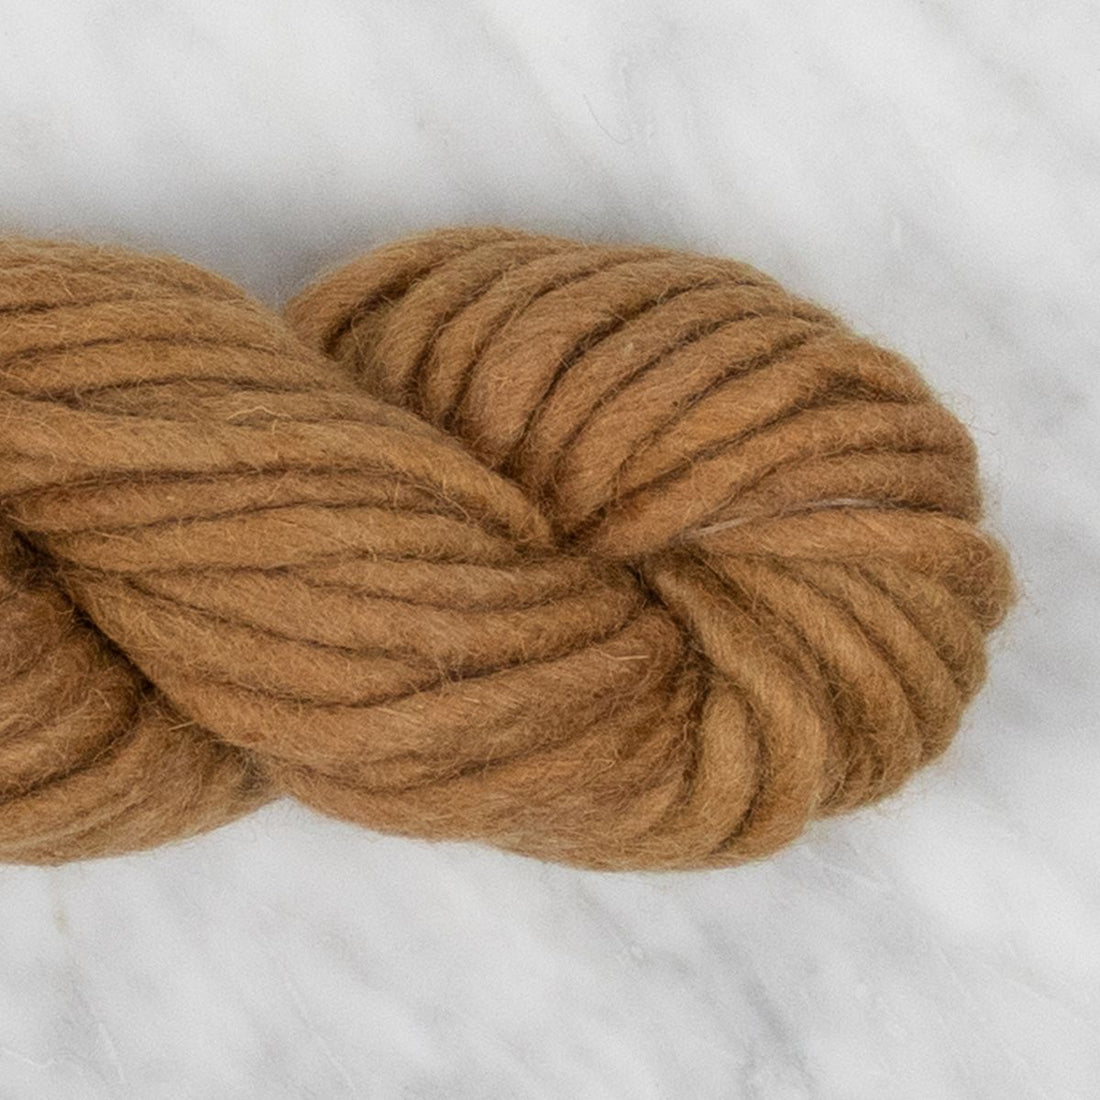 Fine Felted Wool - Antique Gold